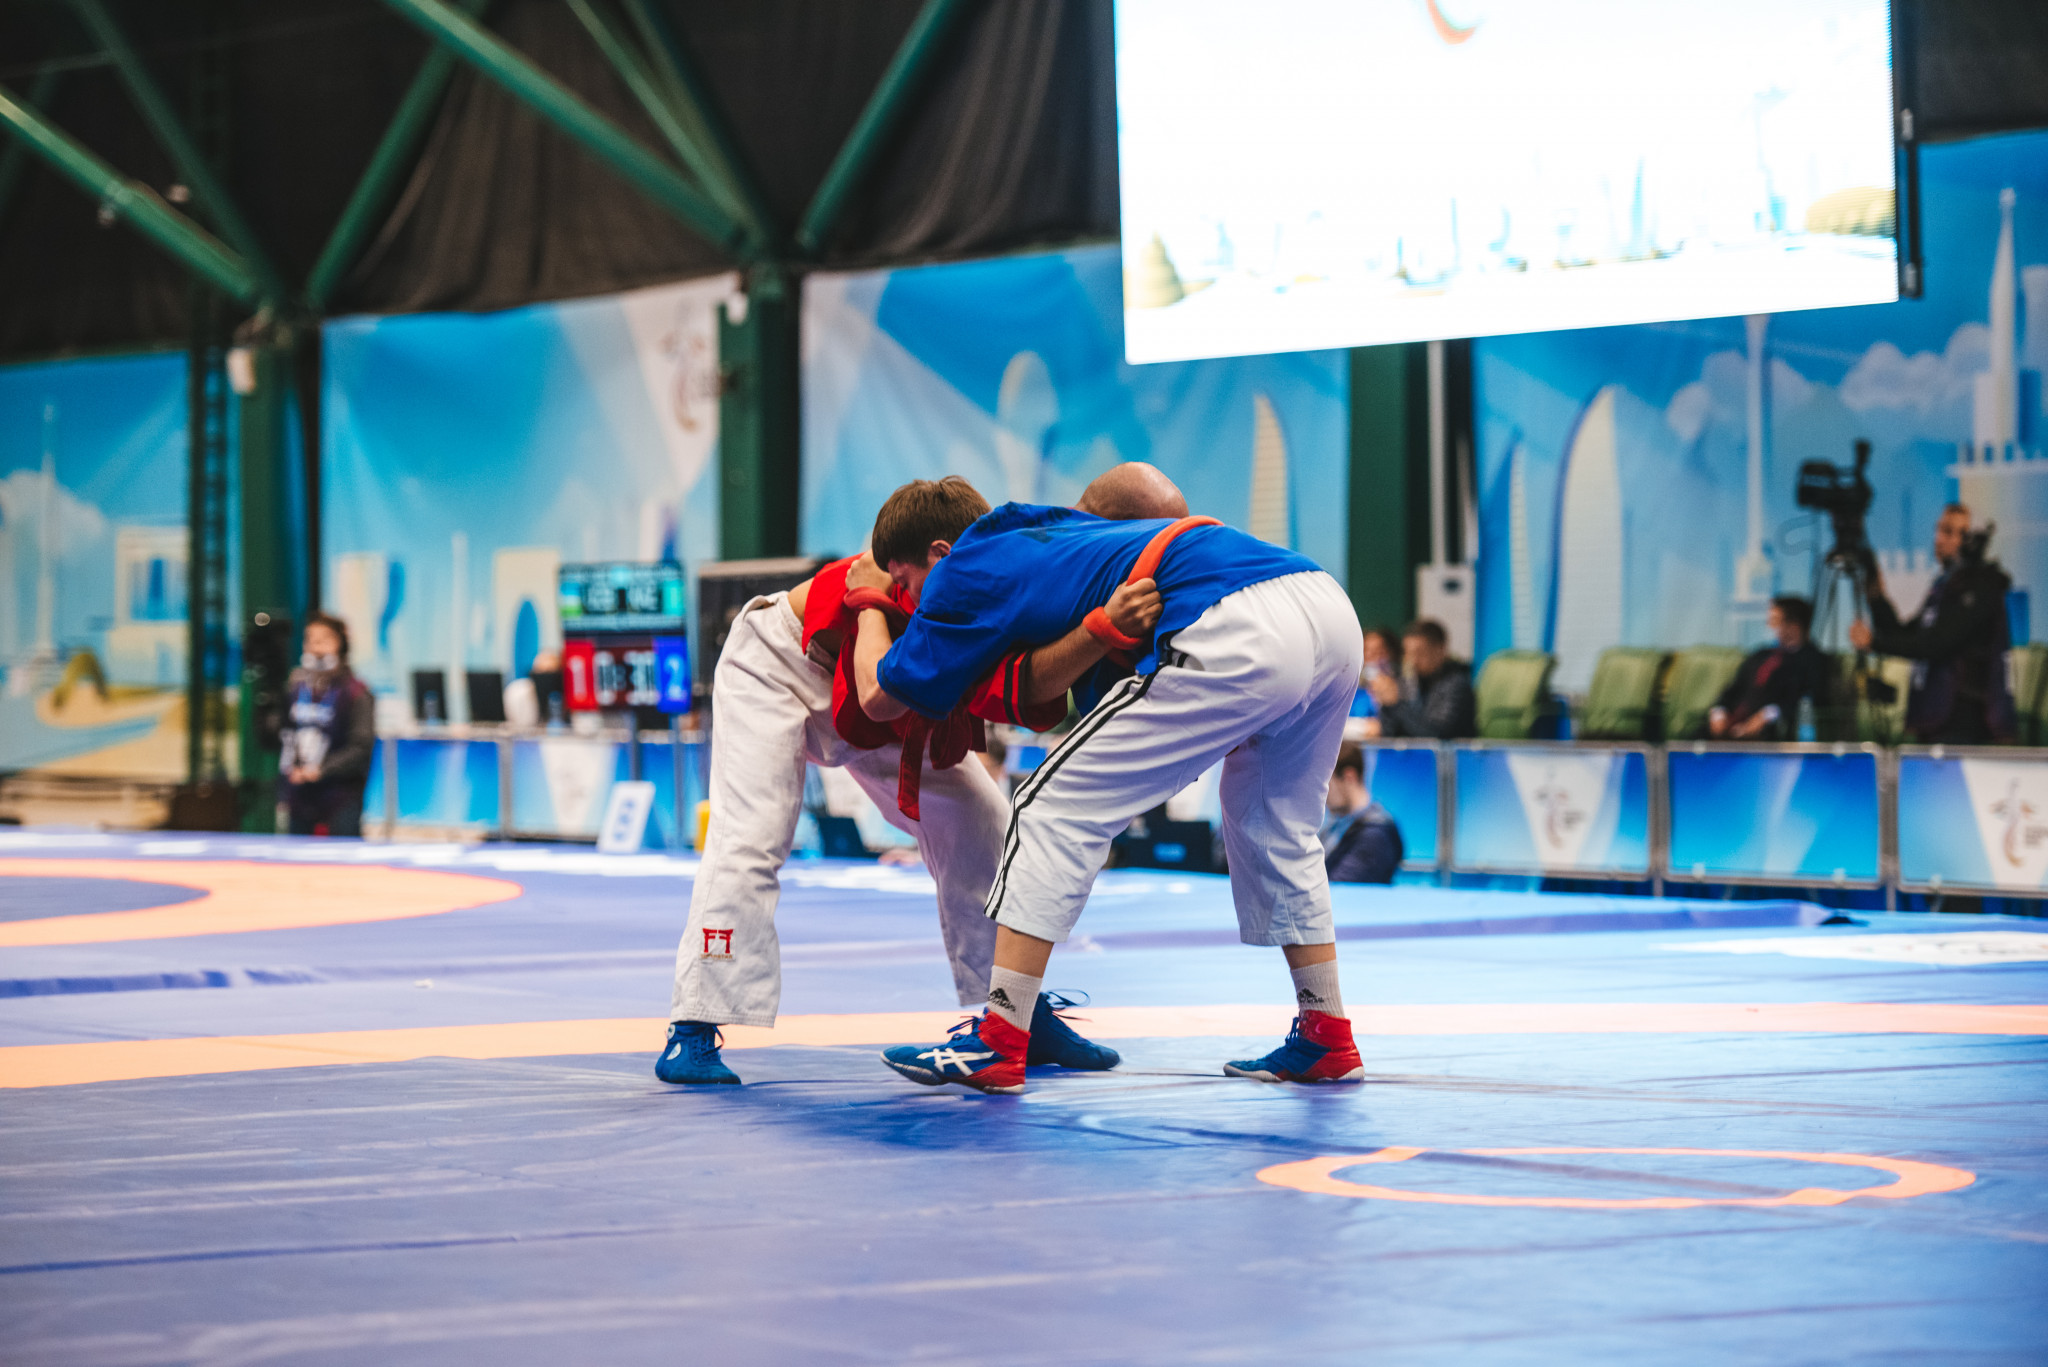 Uzbekistan won half of the belt wrestling gold medals available, including five of the eight female titles ©DSCP/Flickr